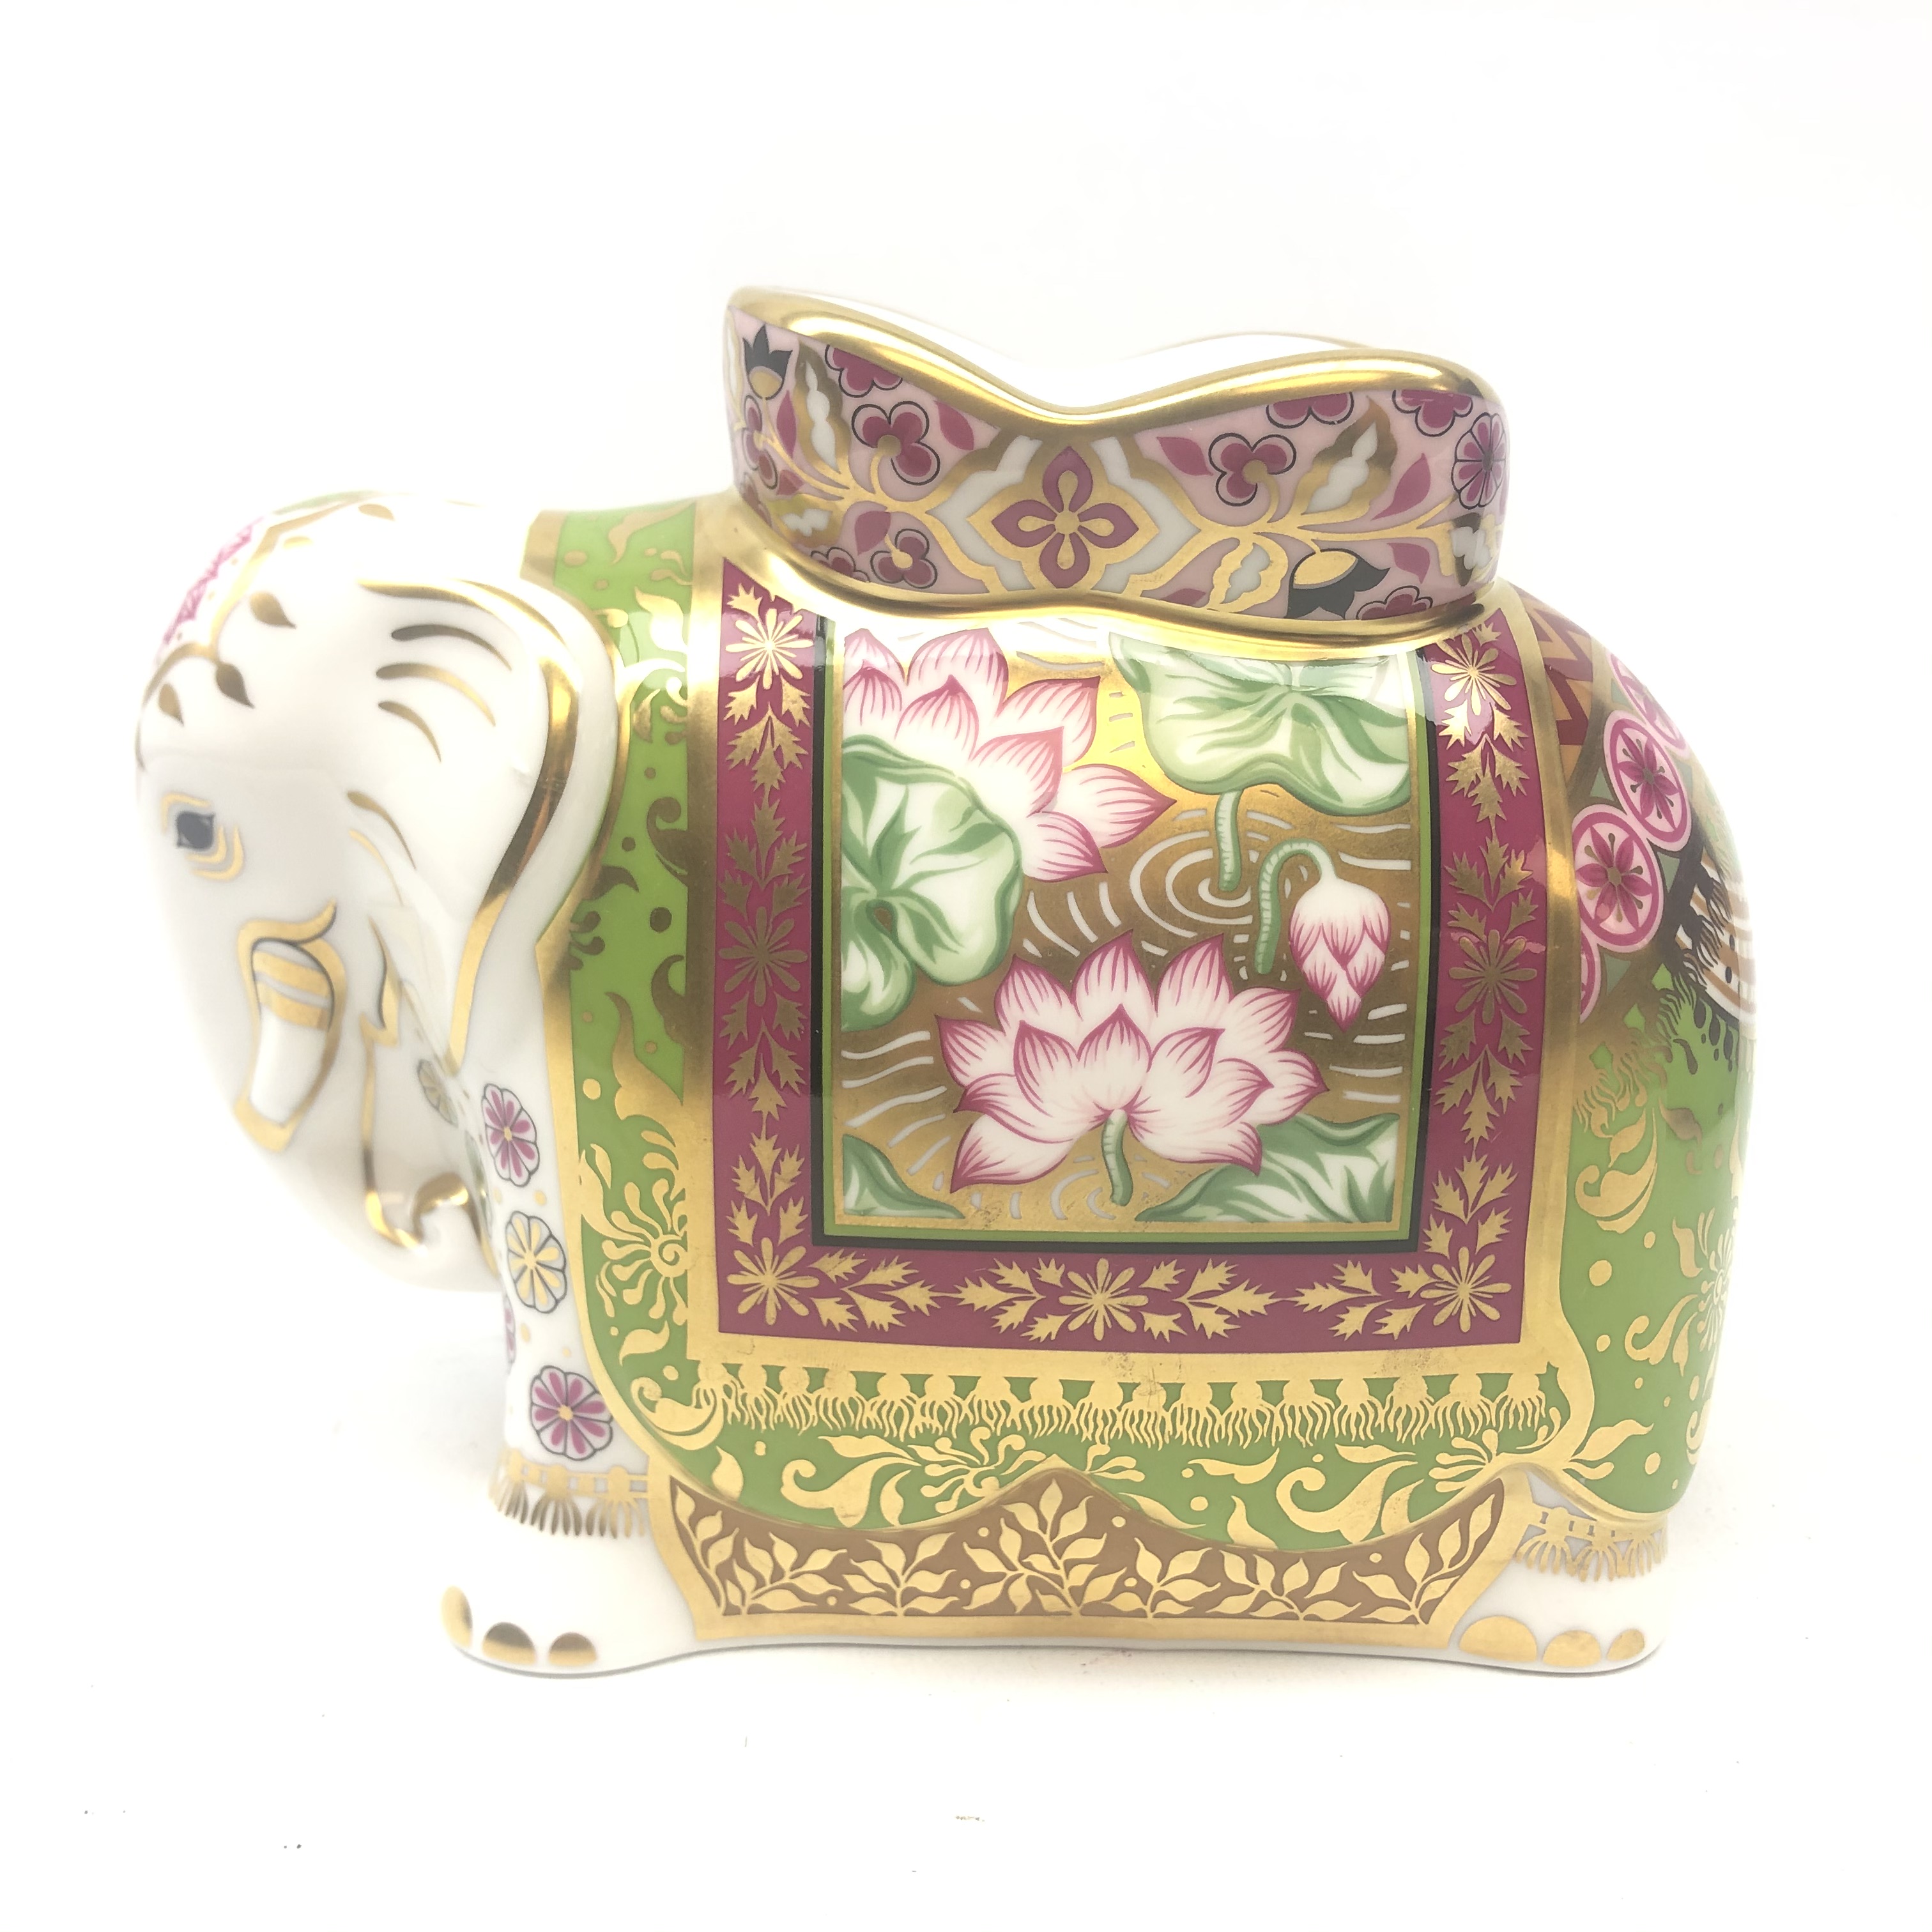 Royal Crown Derby Elephant paperweight 'Rani' Edition of 1250 for Govier's of Sidmouth with gold - Image 3 of 3